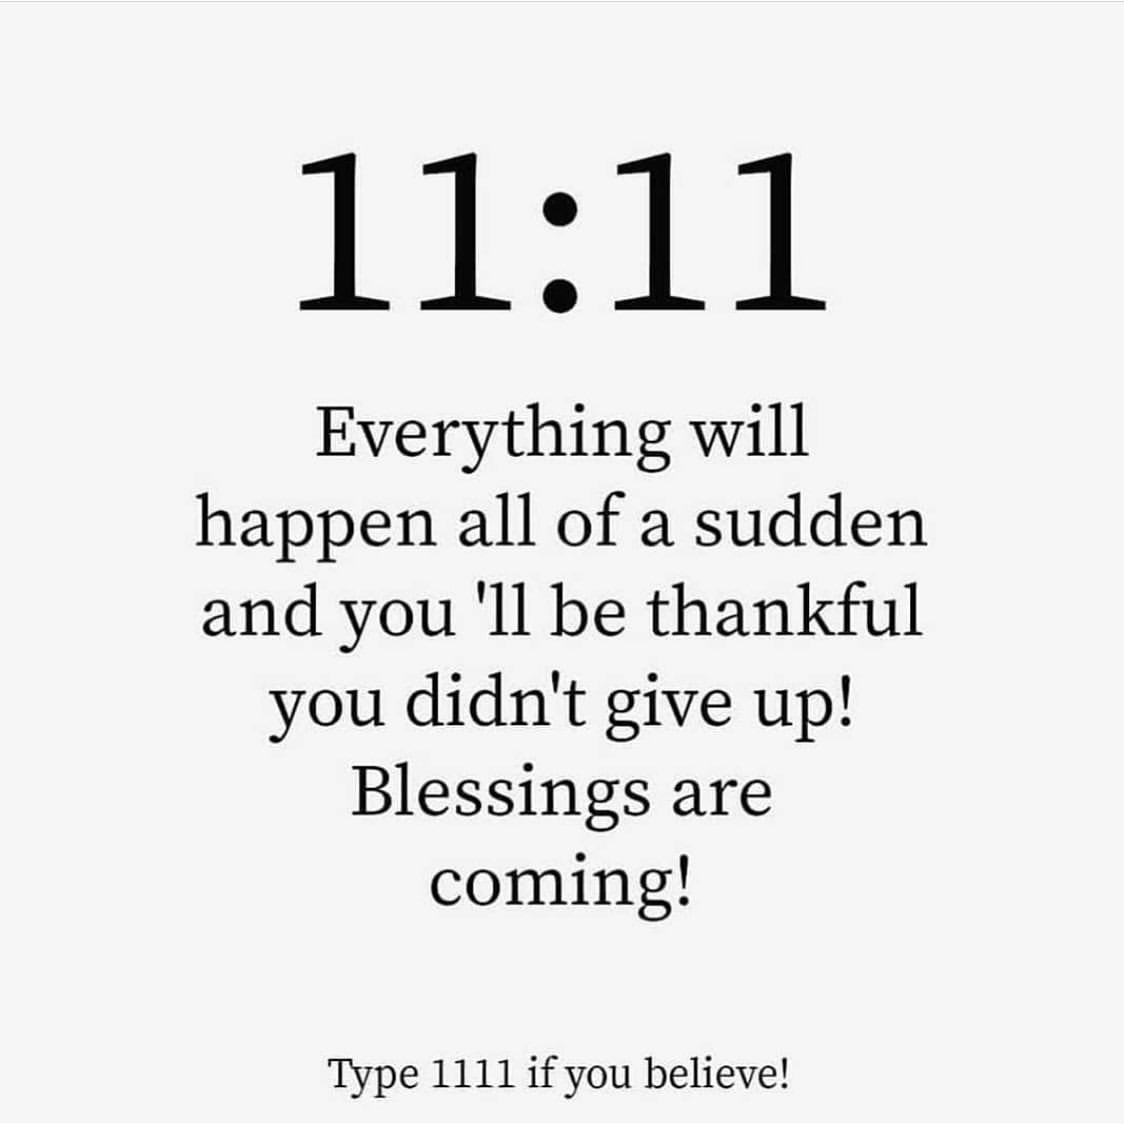 Everything will happen all of a sudden and you 'll be thankful you didn't give up! Blessings are coming!